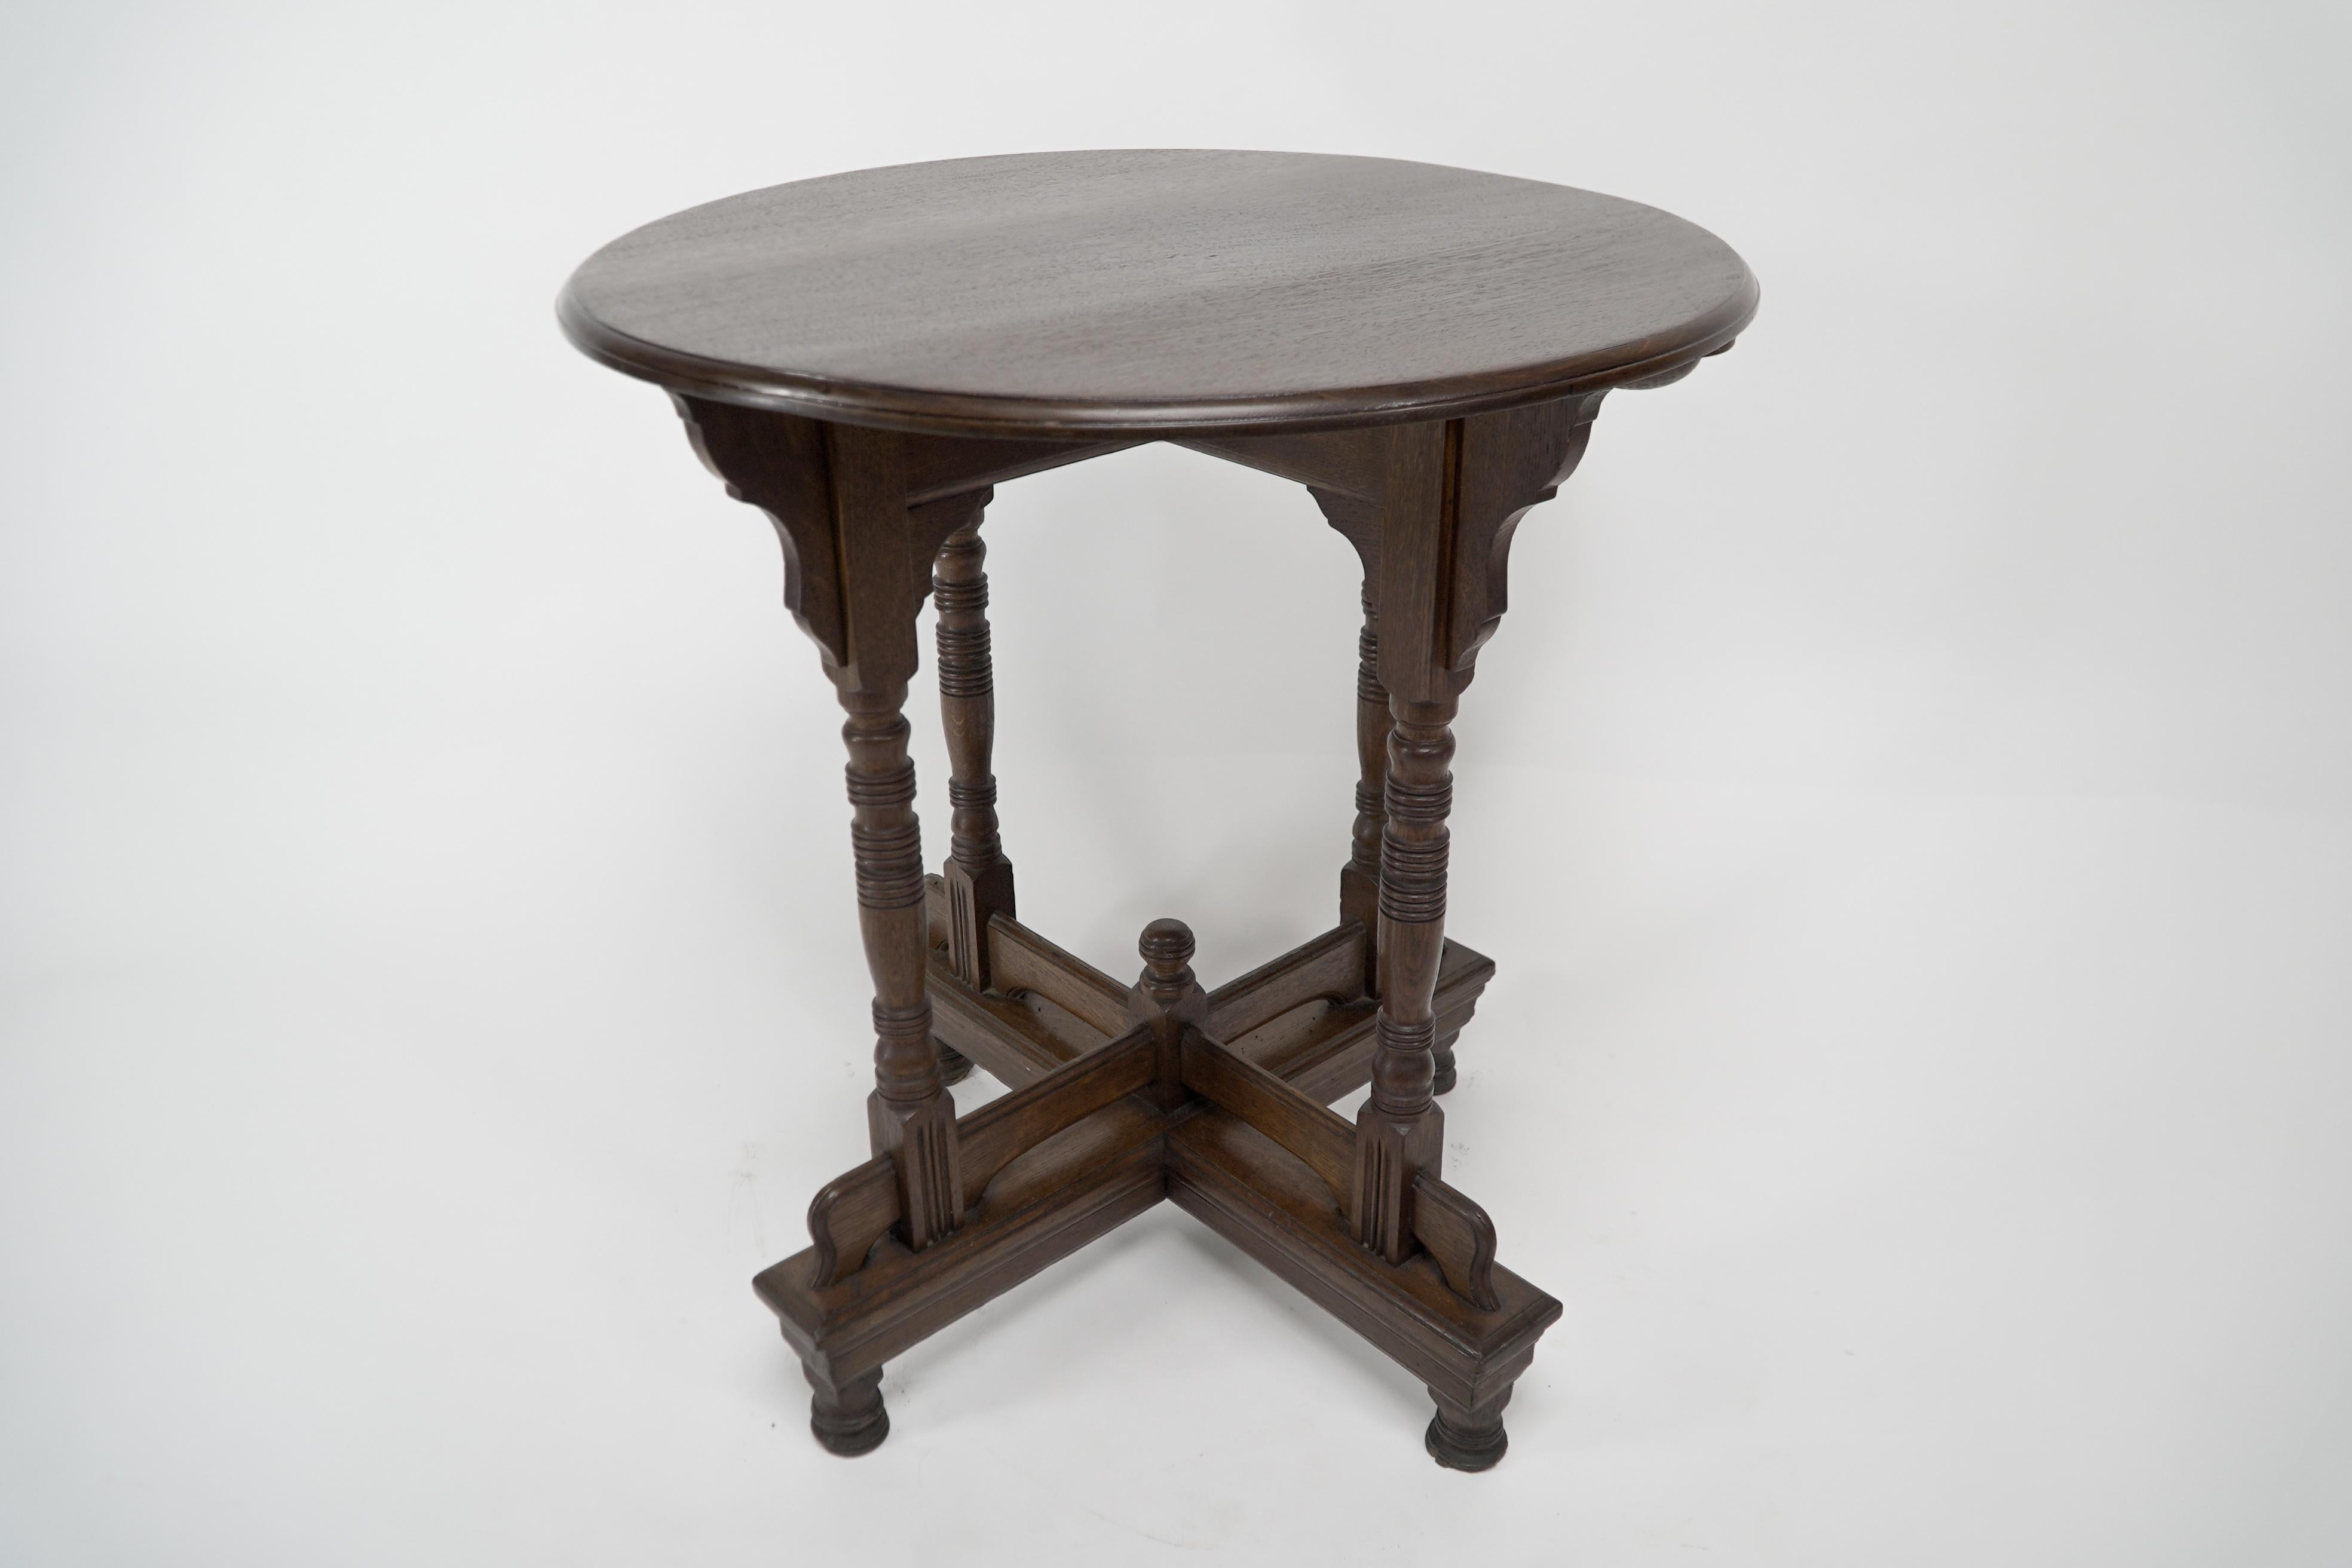 Late 19th Century Alfred Waterhouse. A Gothic Revival oak side table with double cross stretchers. For Sale